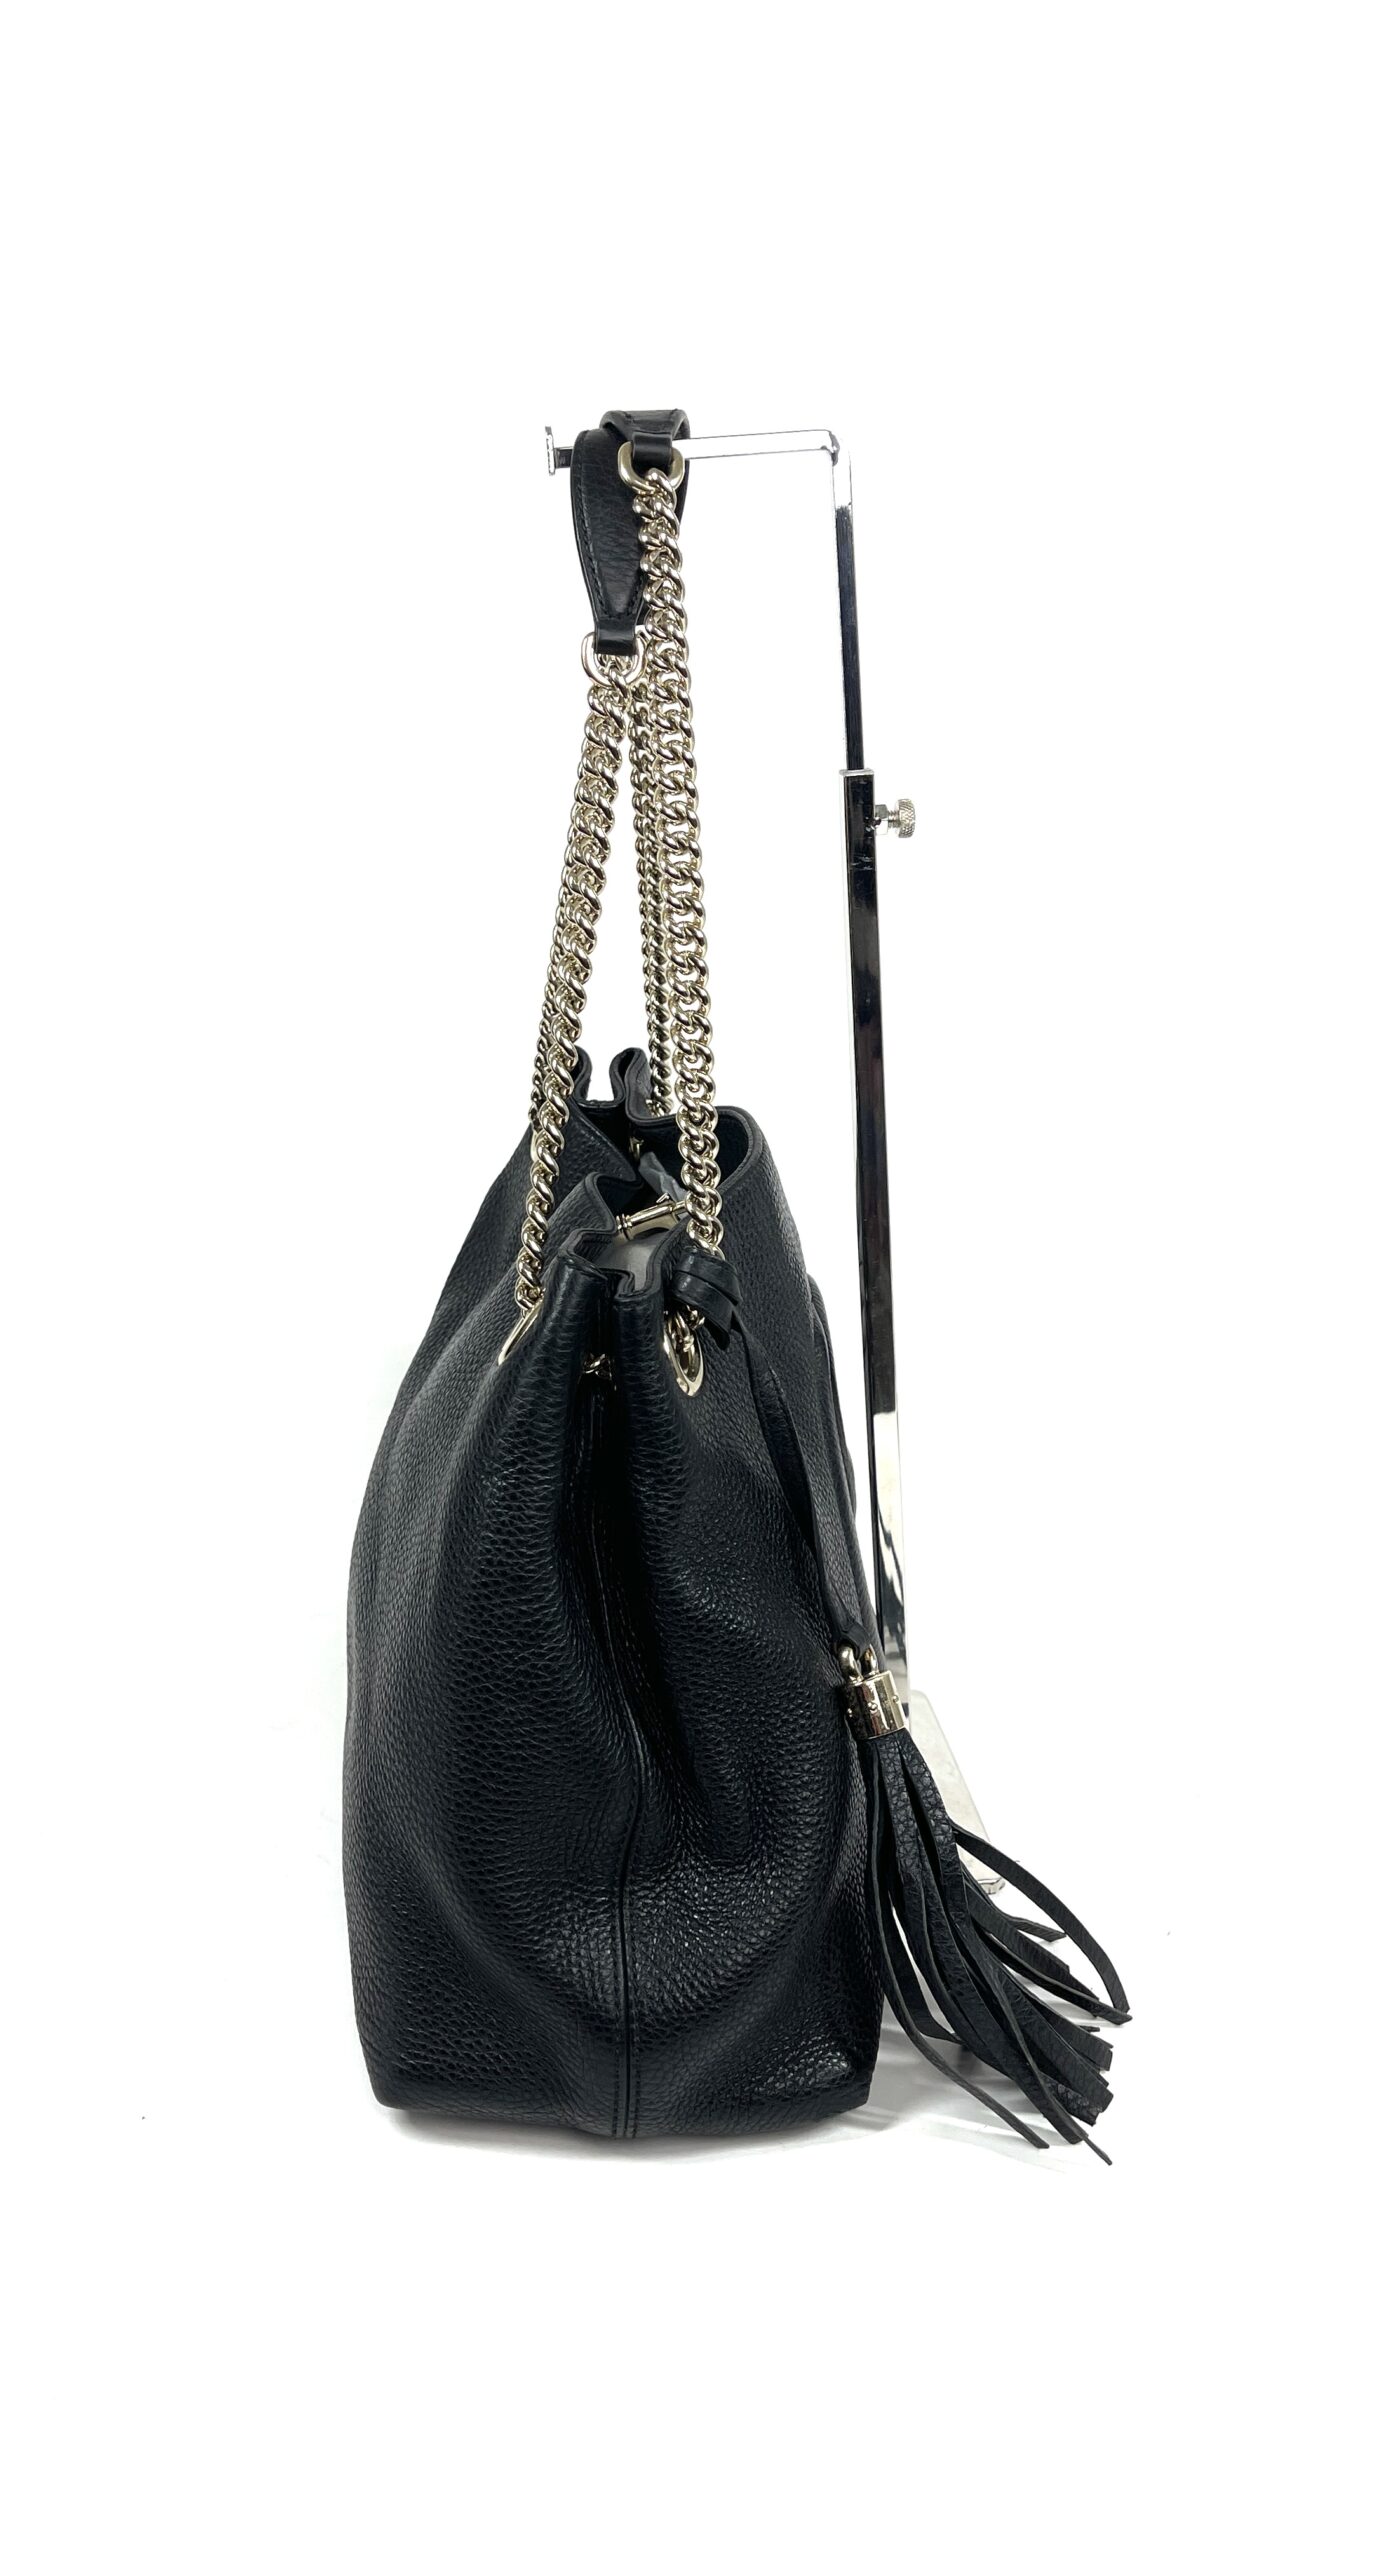 Gucci SOHO Hobo Bag in Black Leather With Gold Toned Hardware 